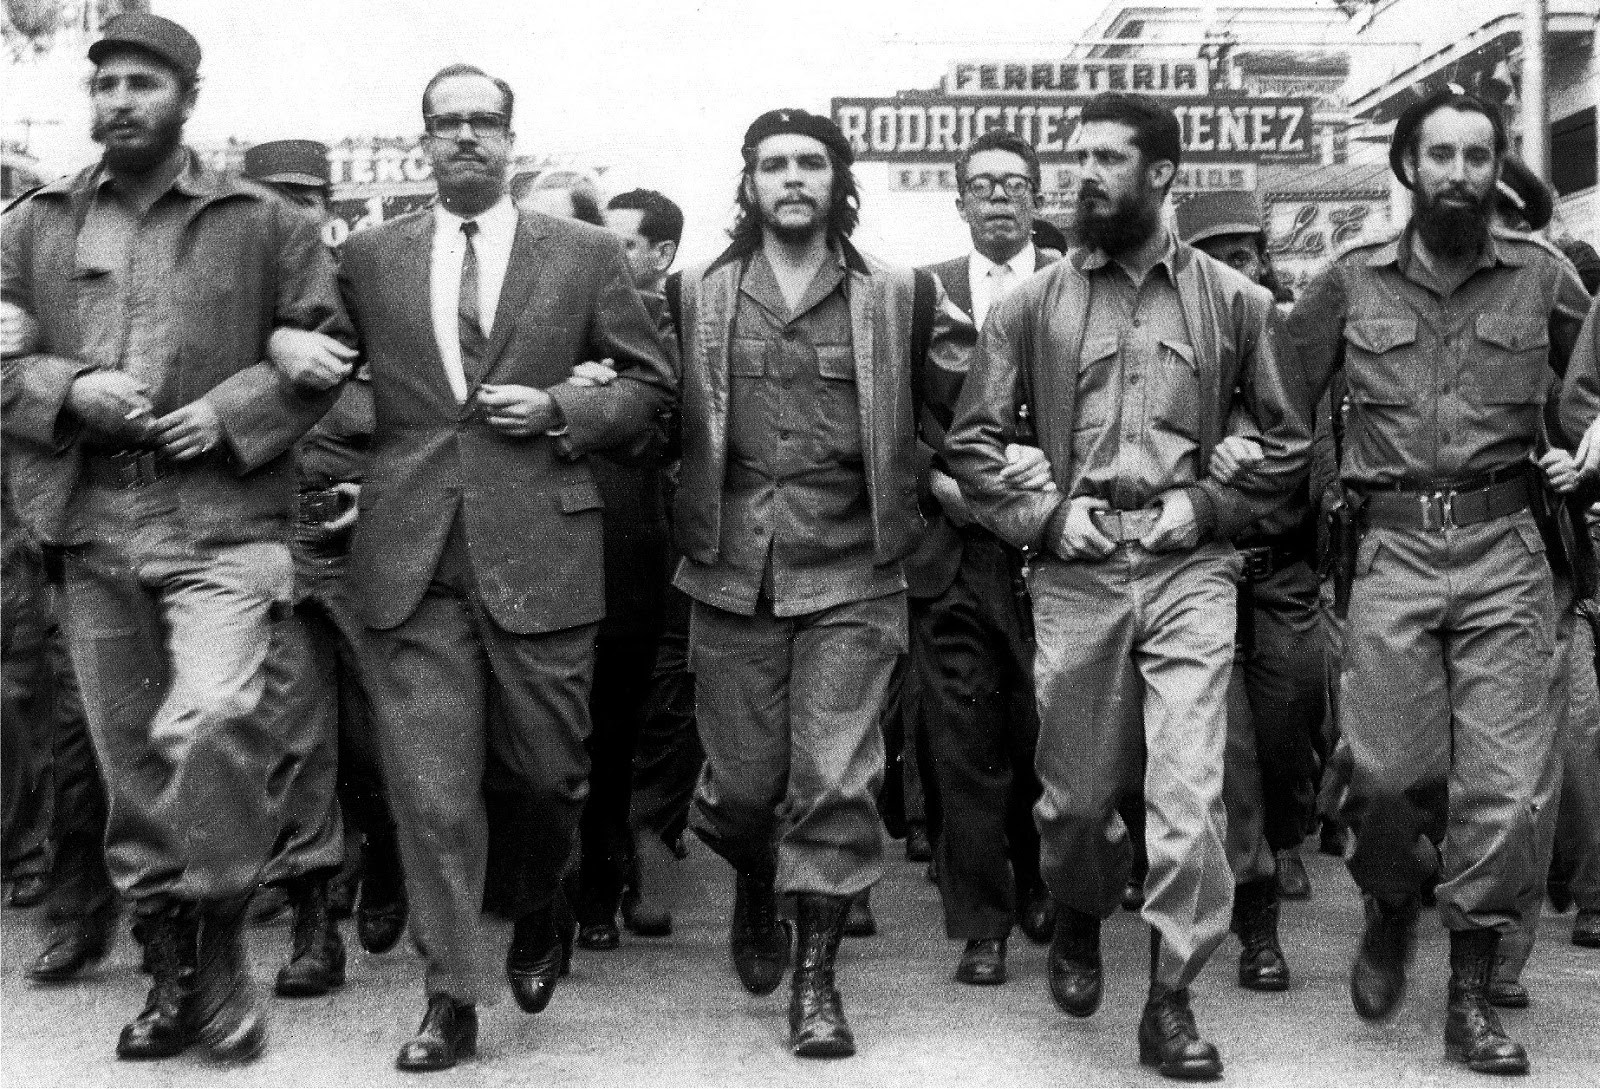 Fidel Castro (far left) and Che Guevara (middle) marching in Havana